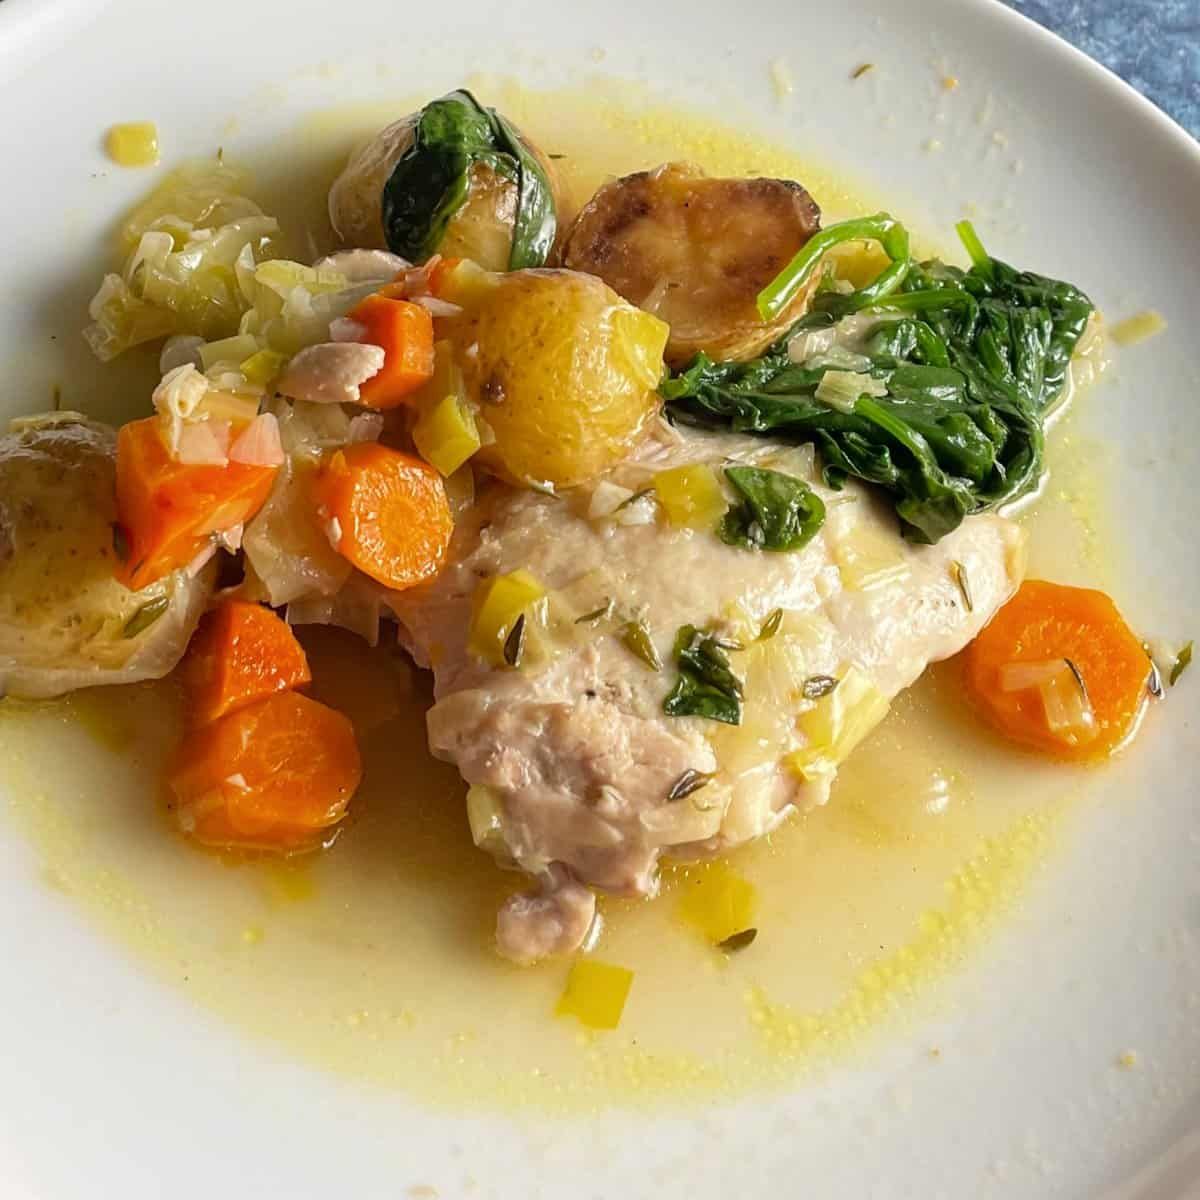 Braised Boneless Chicken Thighs with Vegetables buff.ly/3CThjJM